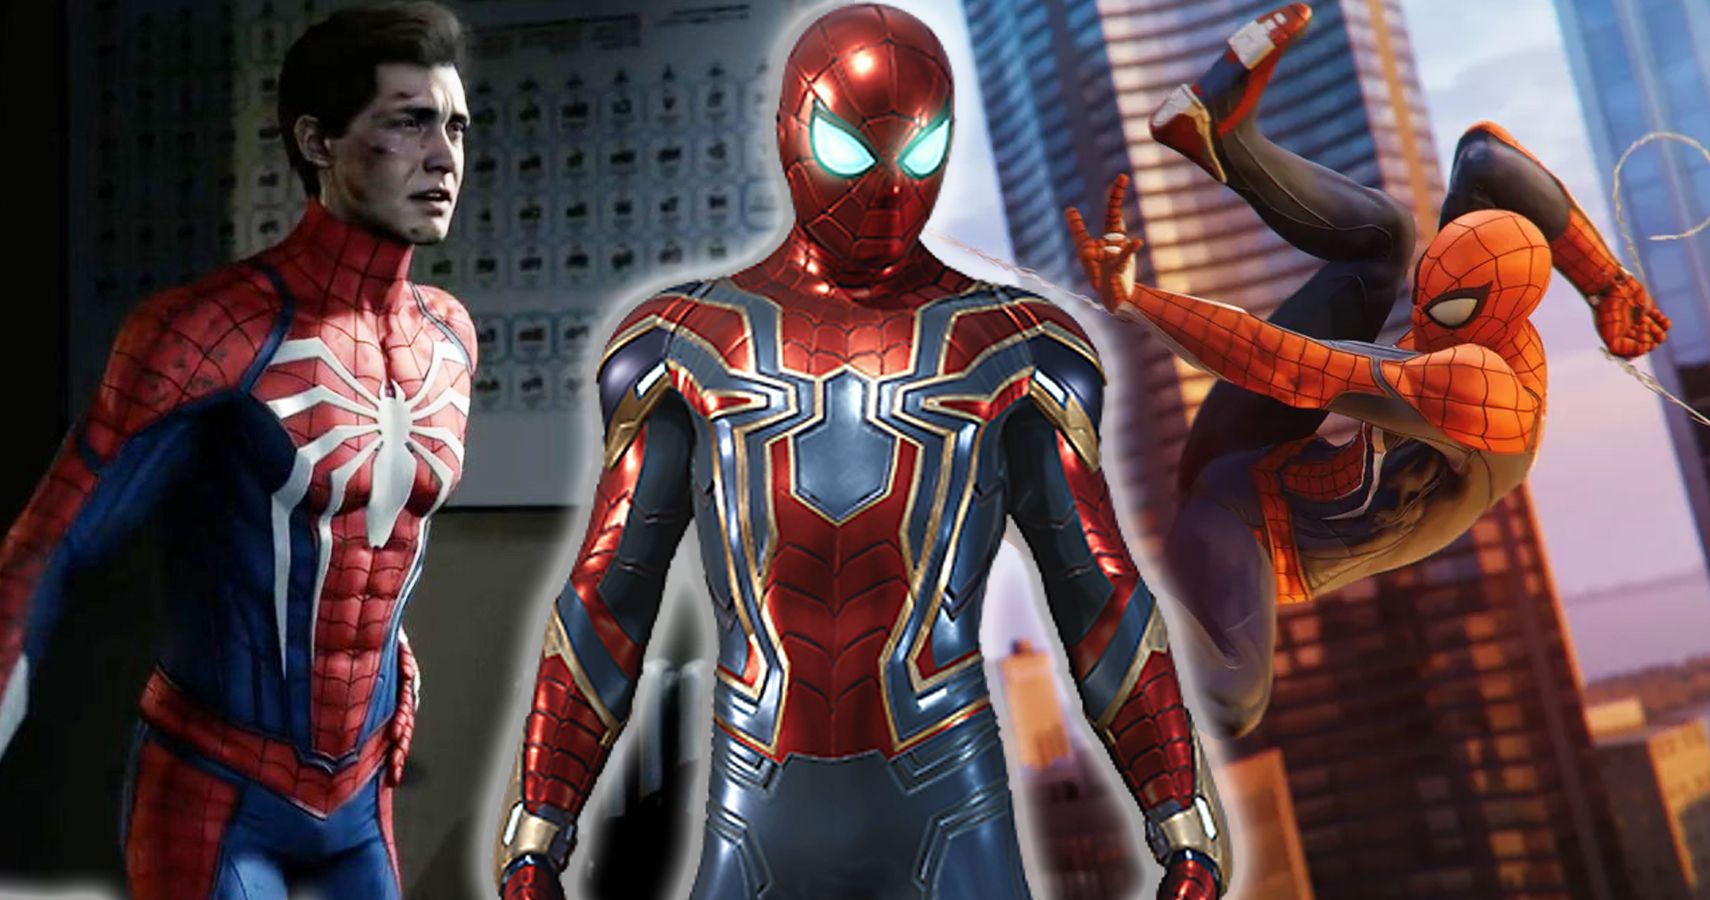 Spider-Man PS4  Insomniac Games on crafting its own spin on the web-slinger